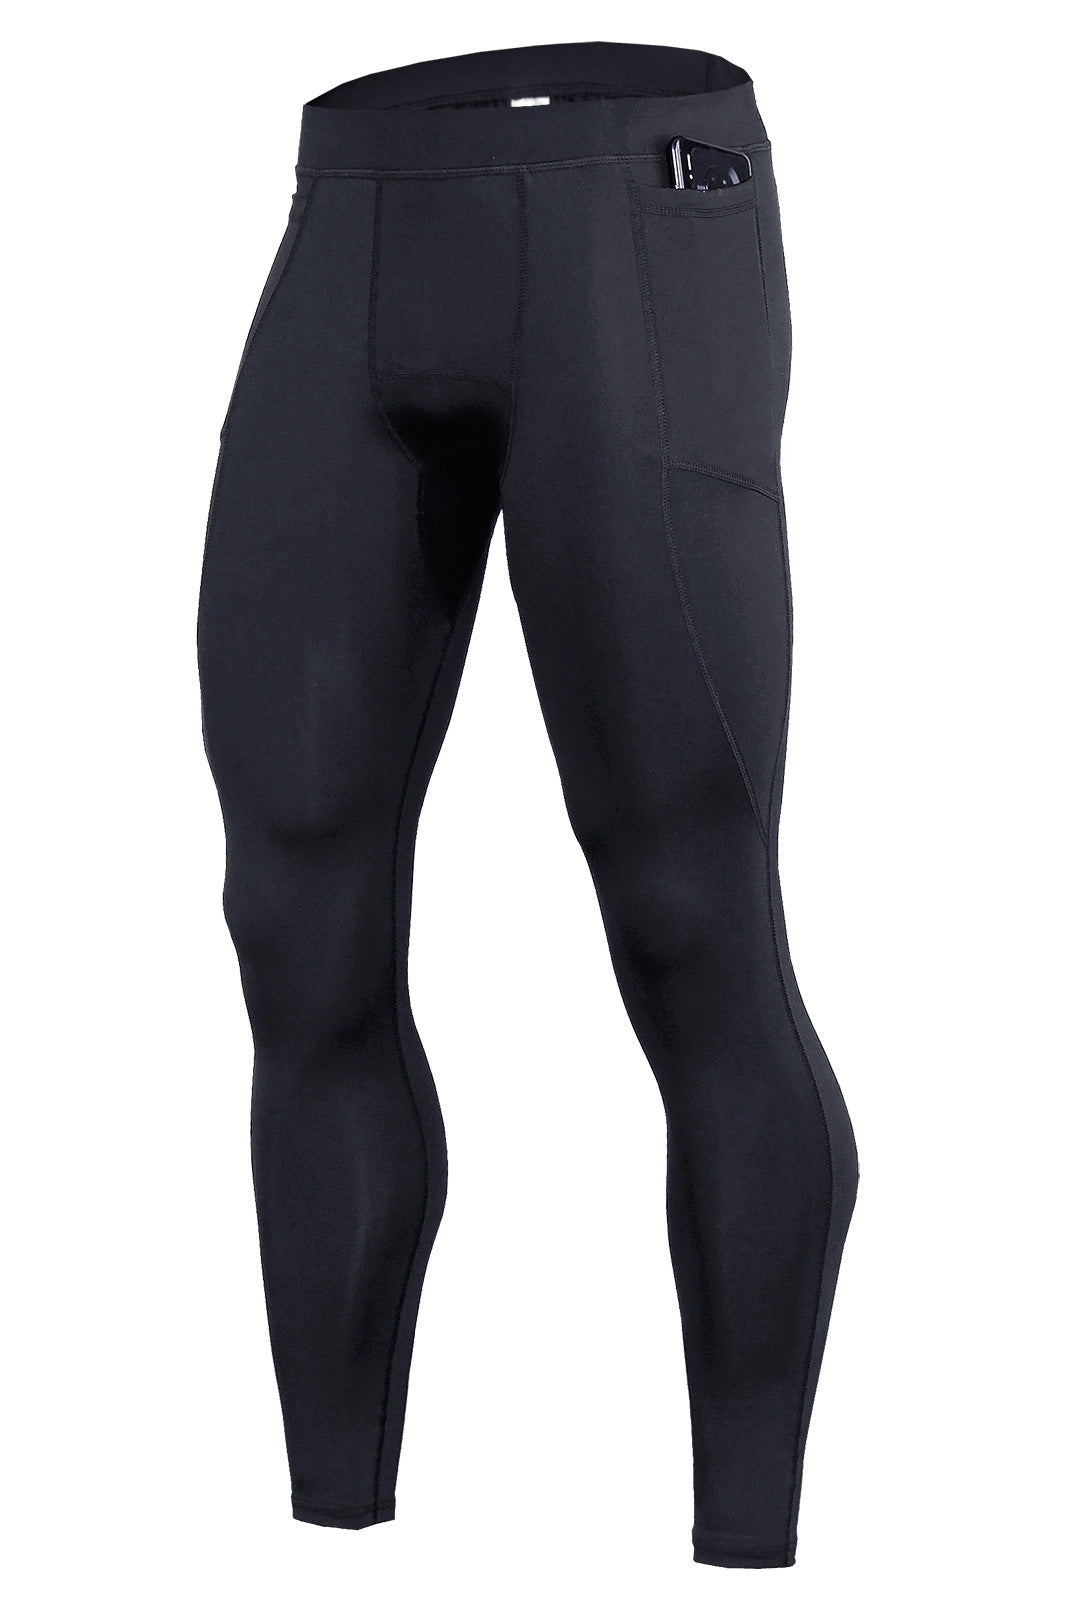 Men's Sport Fitness Compression Gear with Pockets